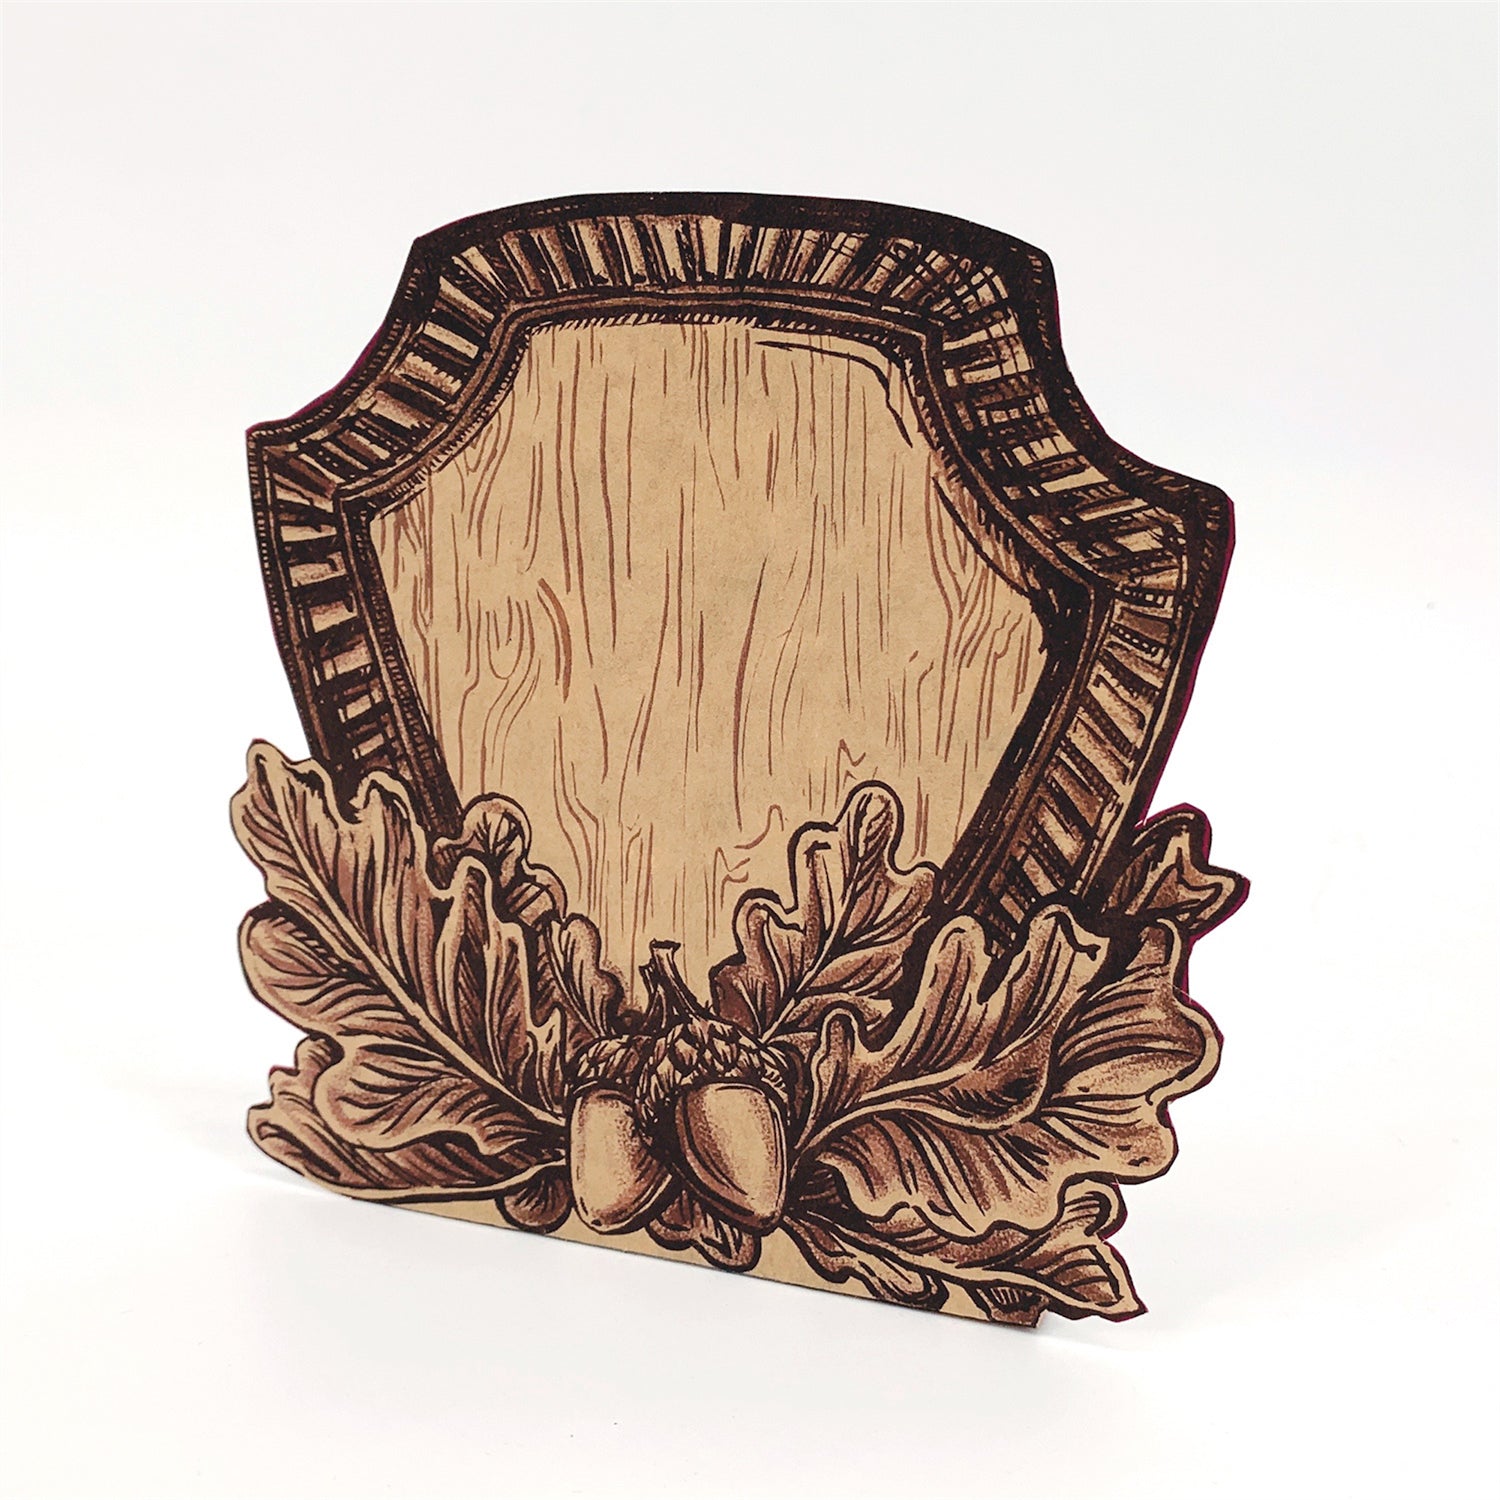 A die-cut, freestanding kraft paper place card featuring deep brown linework of a wooden shield adorned with oak leaves and acorn across the bottom.